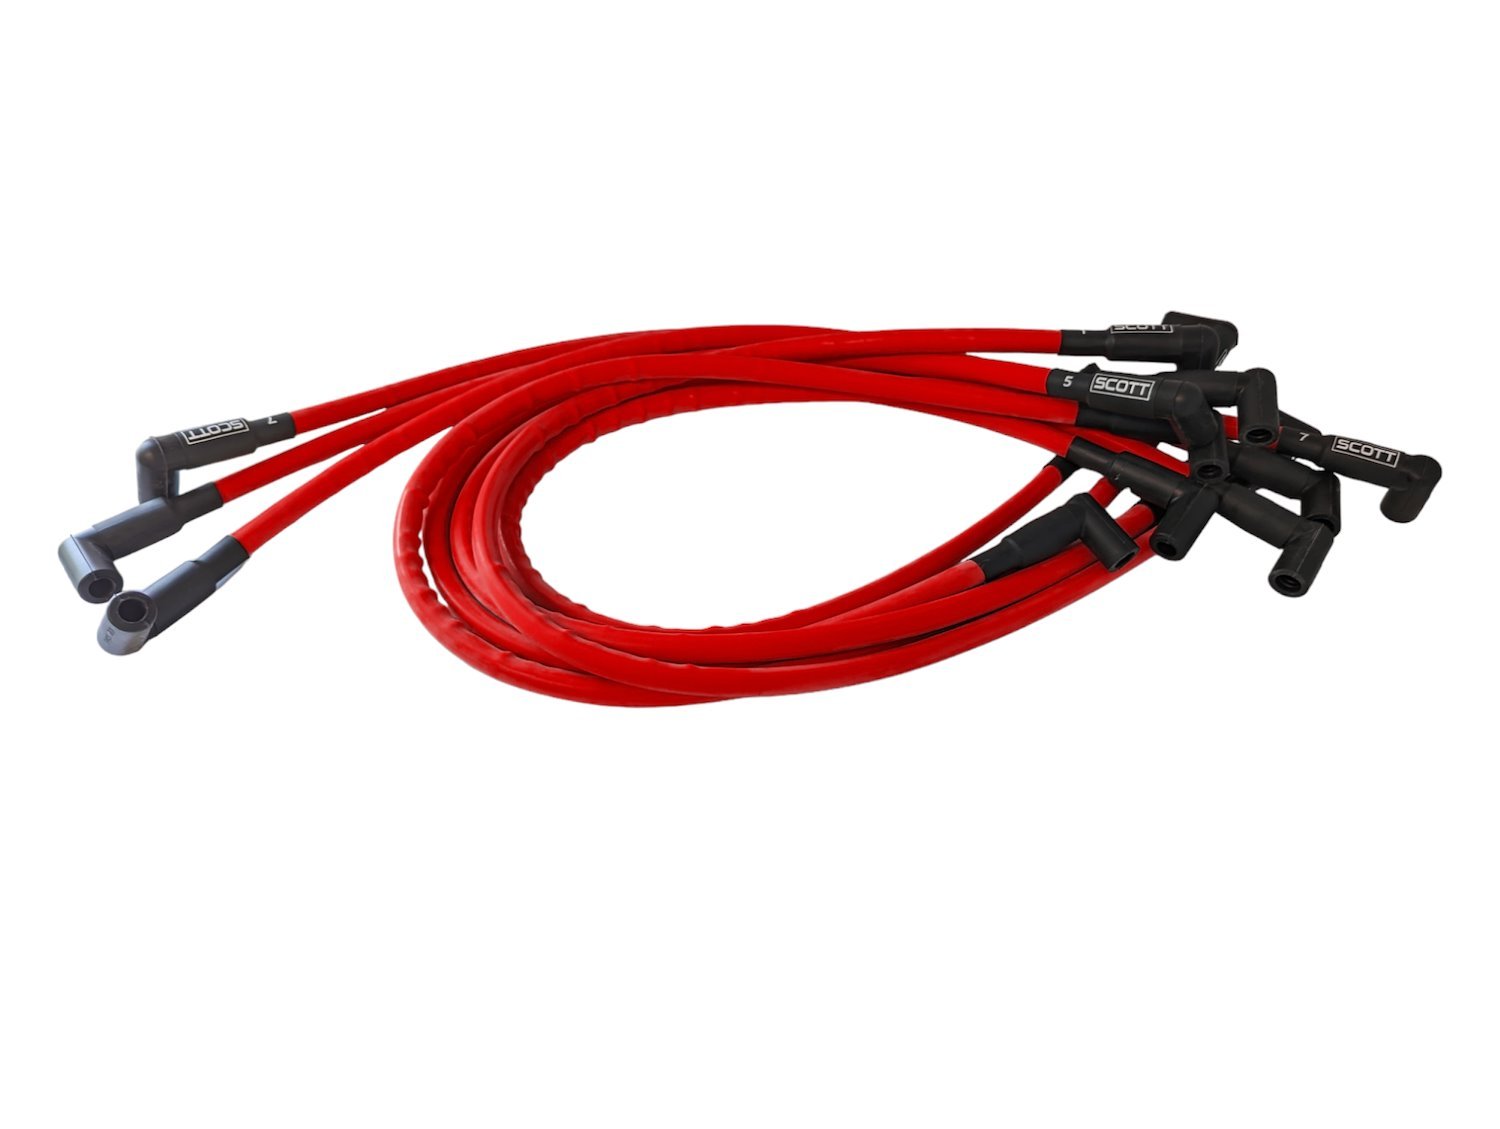 SPW300-CH-416-2 Super Mag Fiberglass-Oversleeved Spark Plug Wire Set for Big Block Chevy, Under Header [Red]